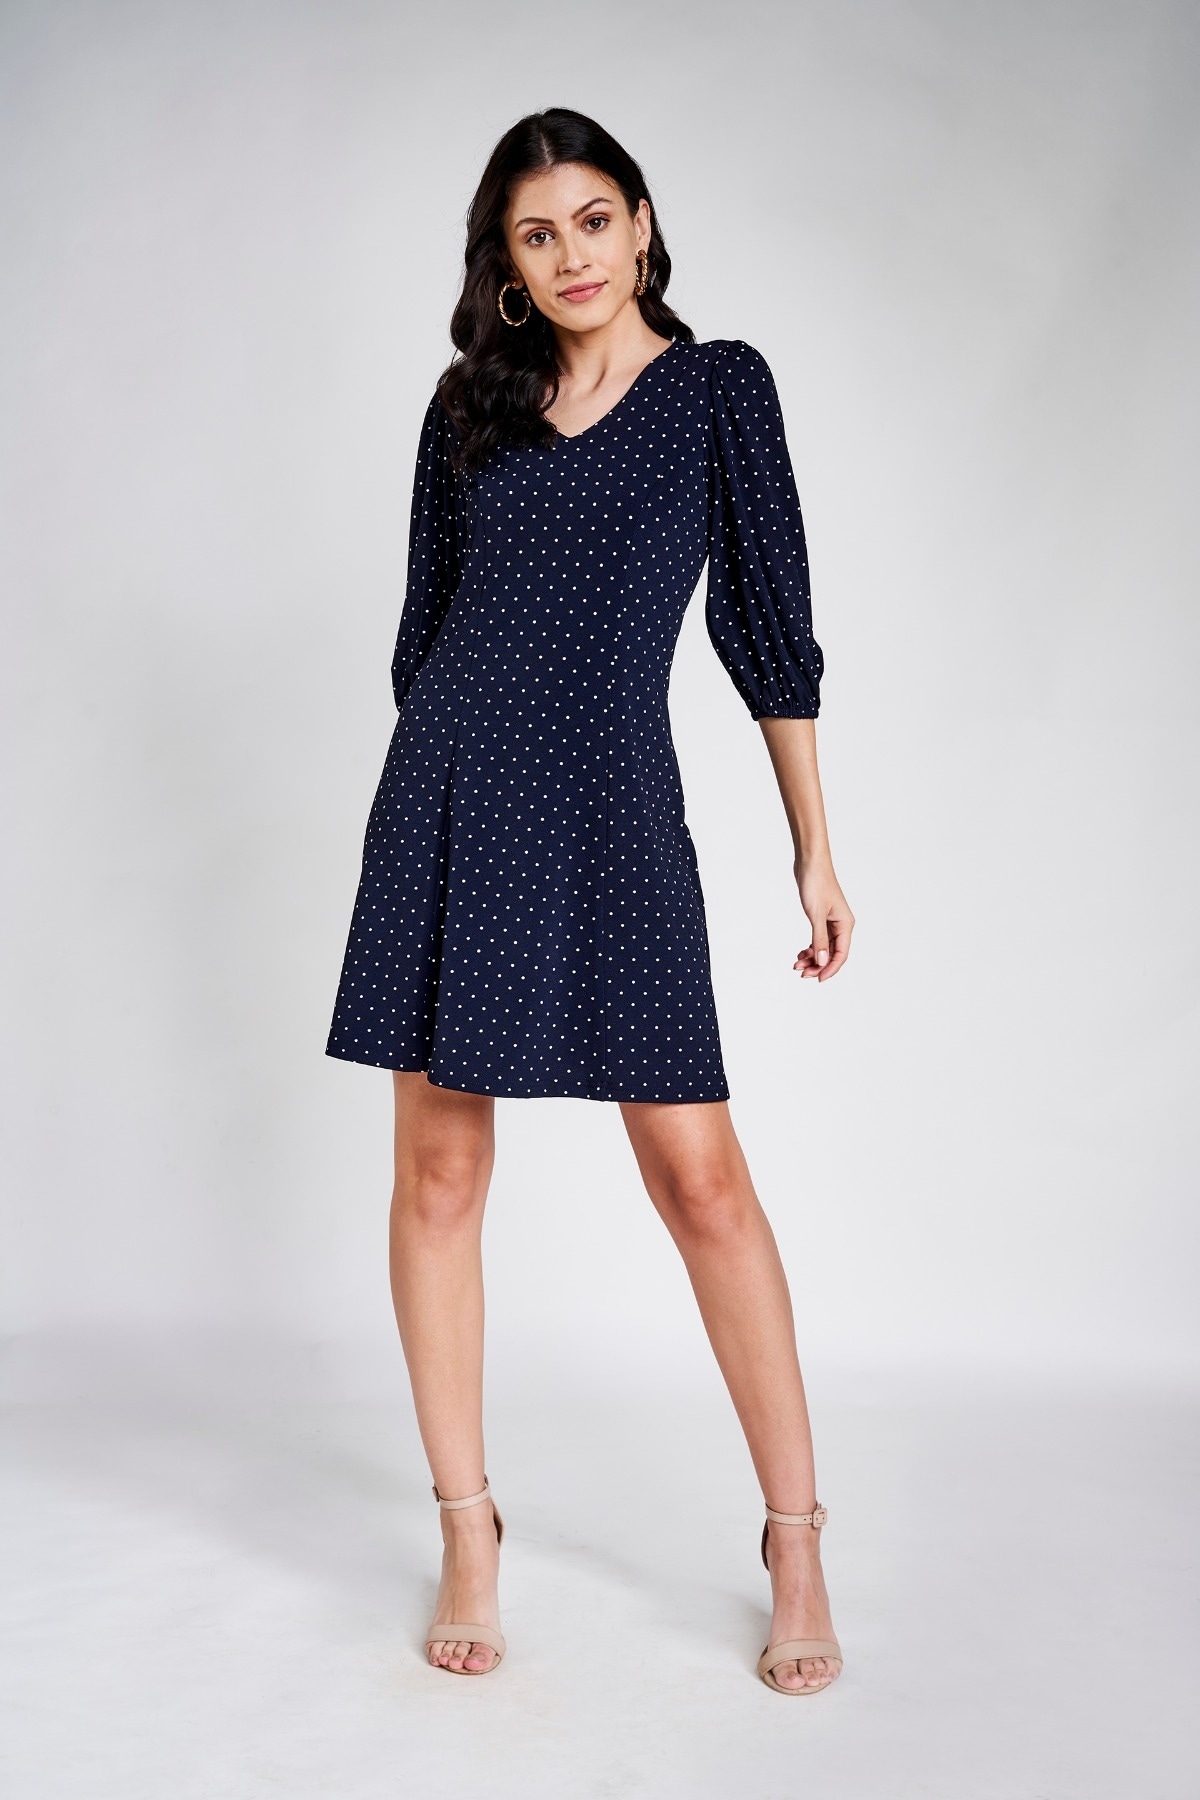 AND | AND NAVY DRESS 0